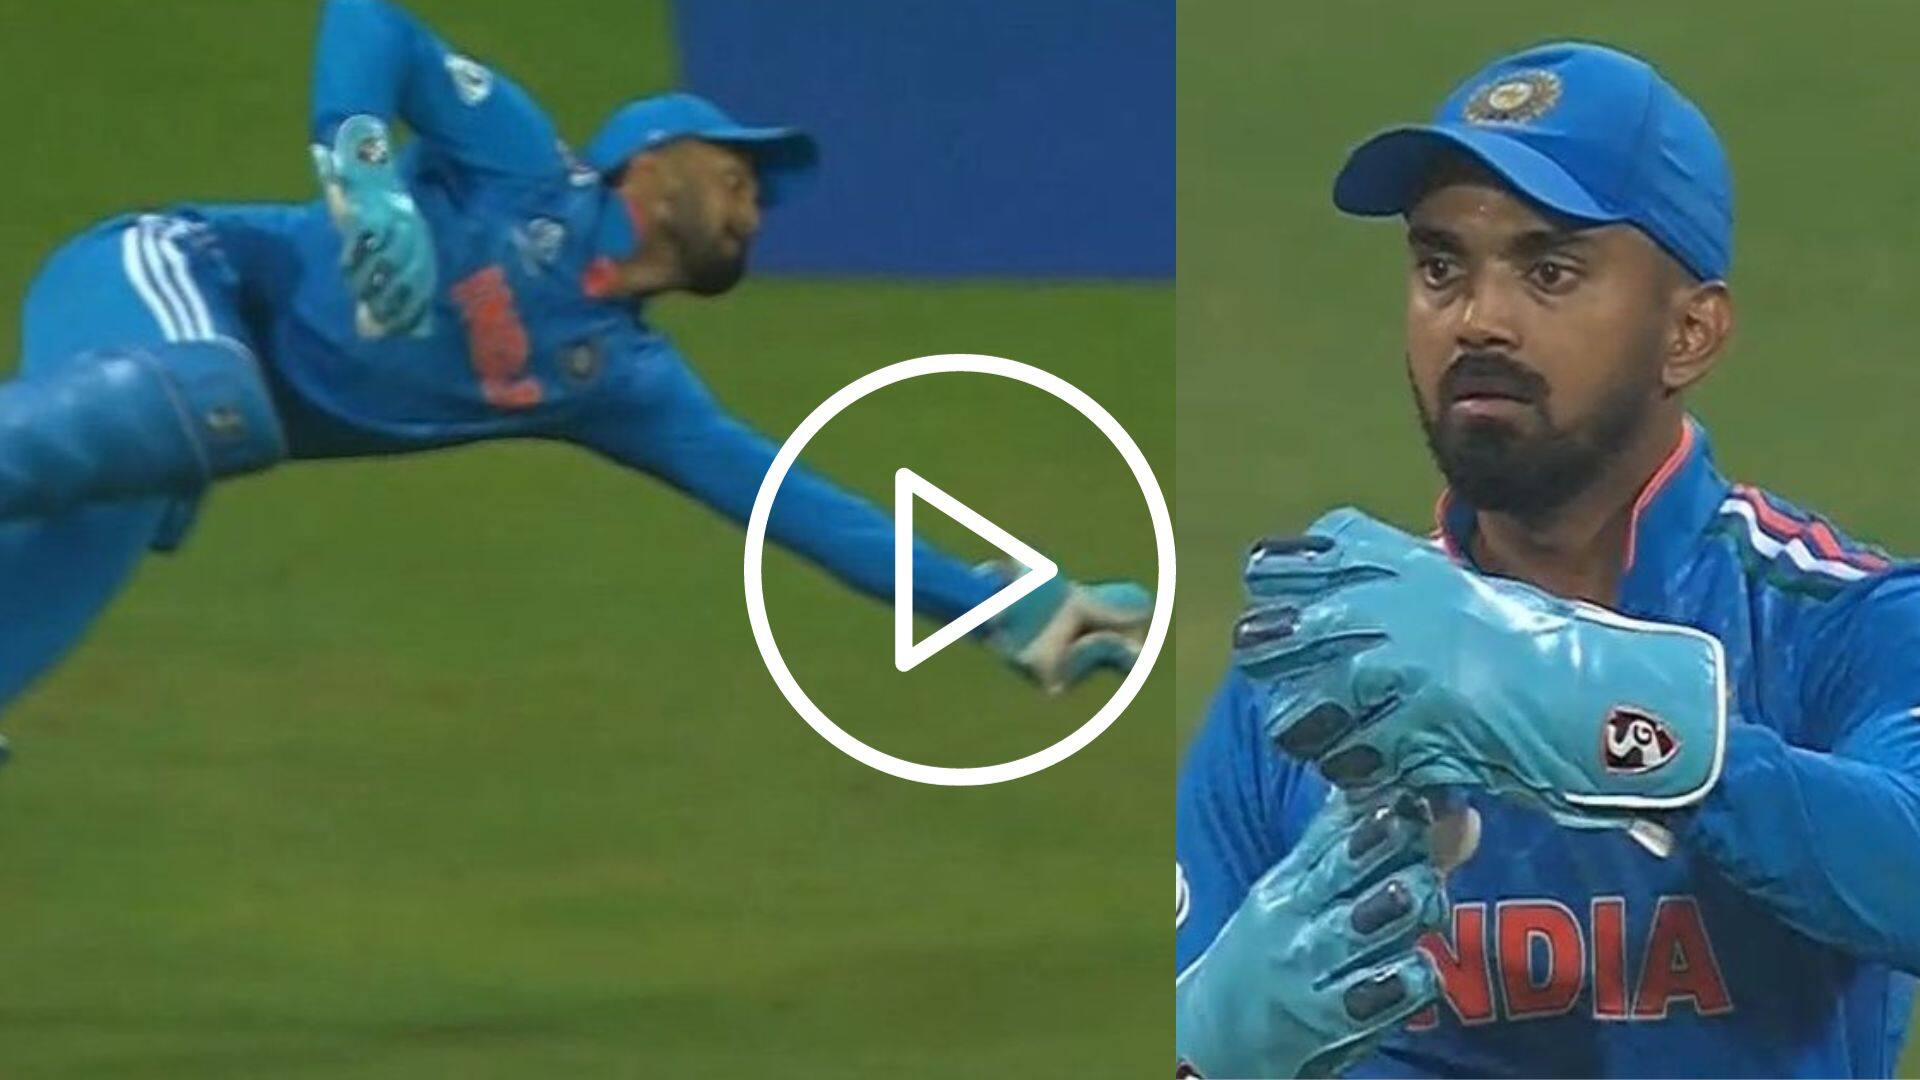 [Watch] Flying KL Rahul Makes Dhoni Proud With A Stunning Catch & DRS Call vs SL